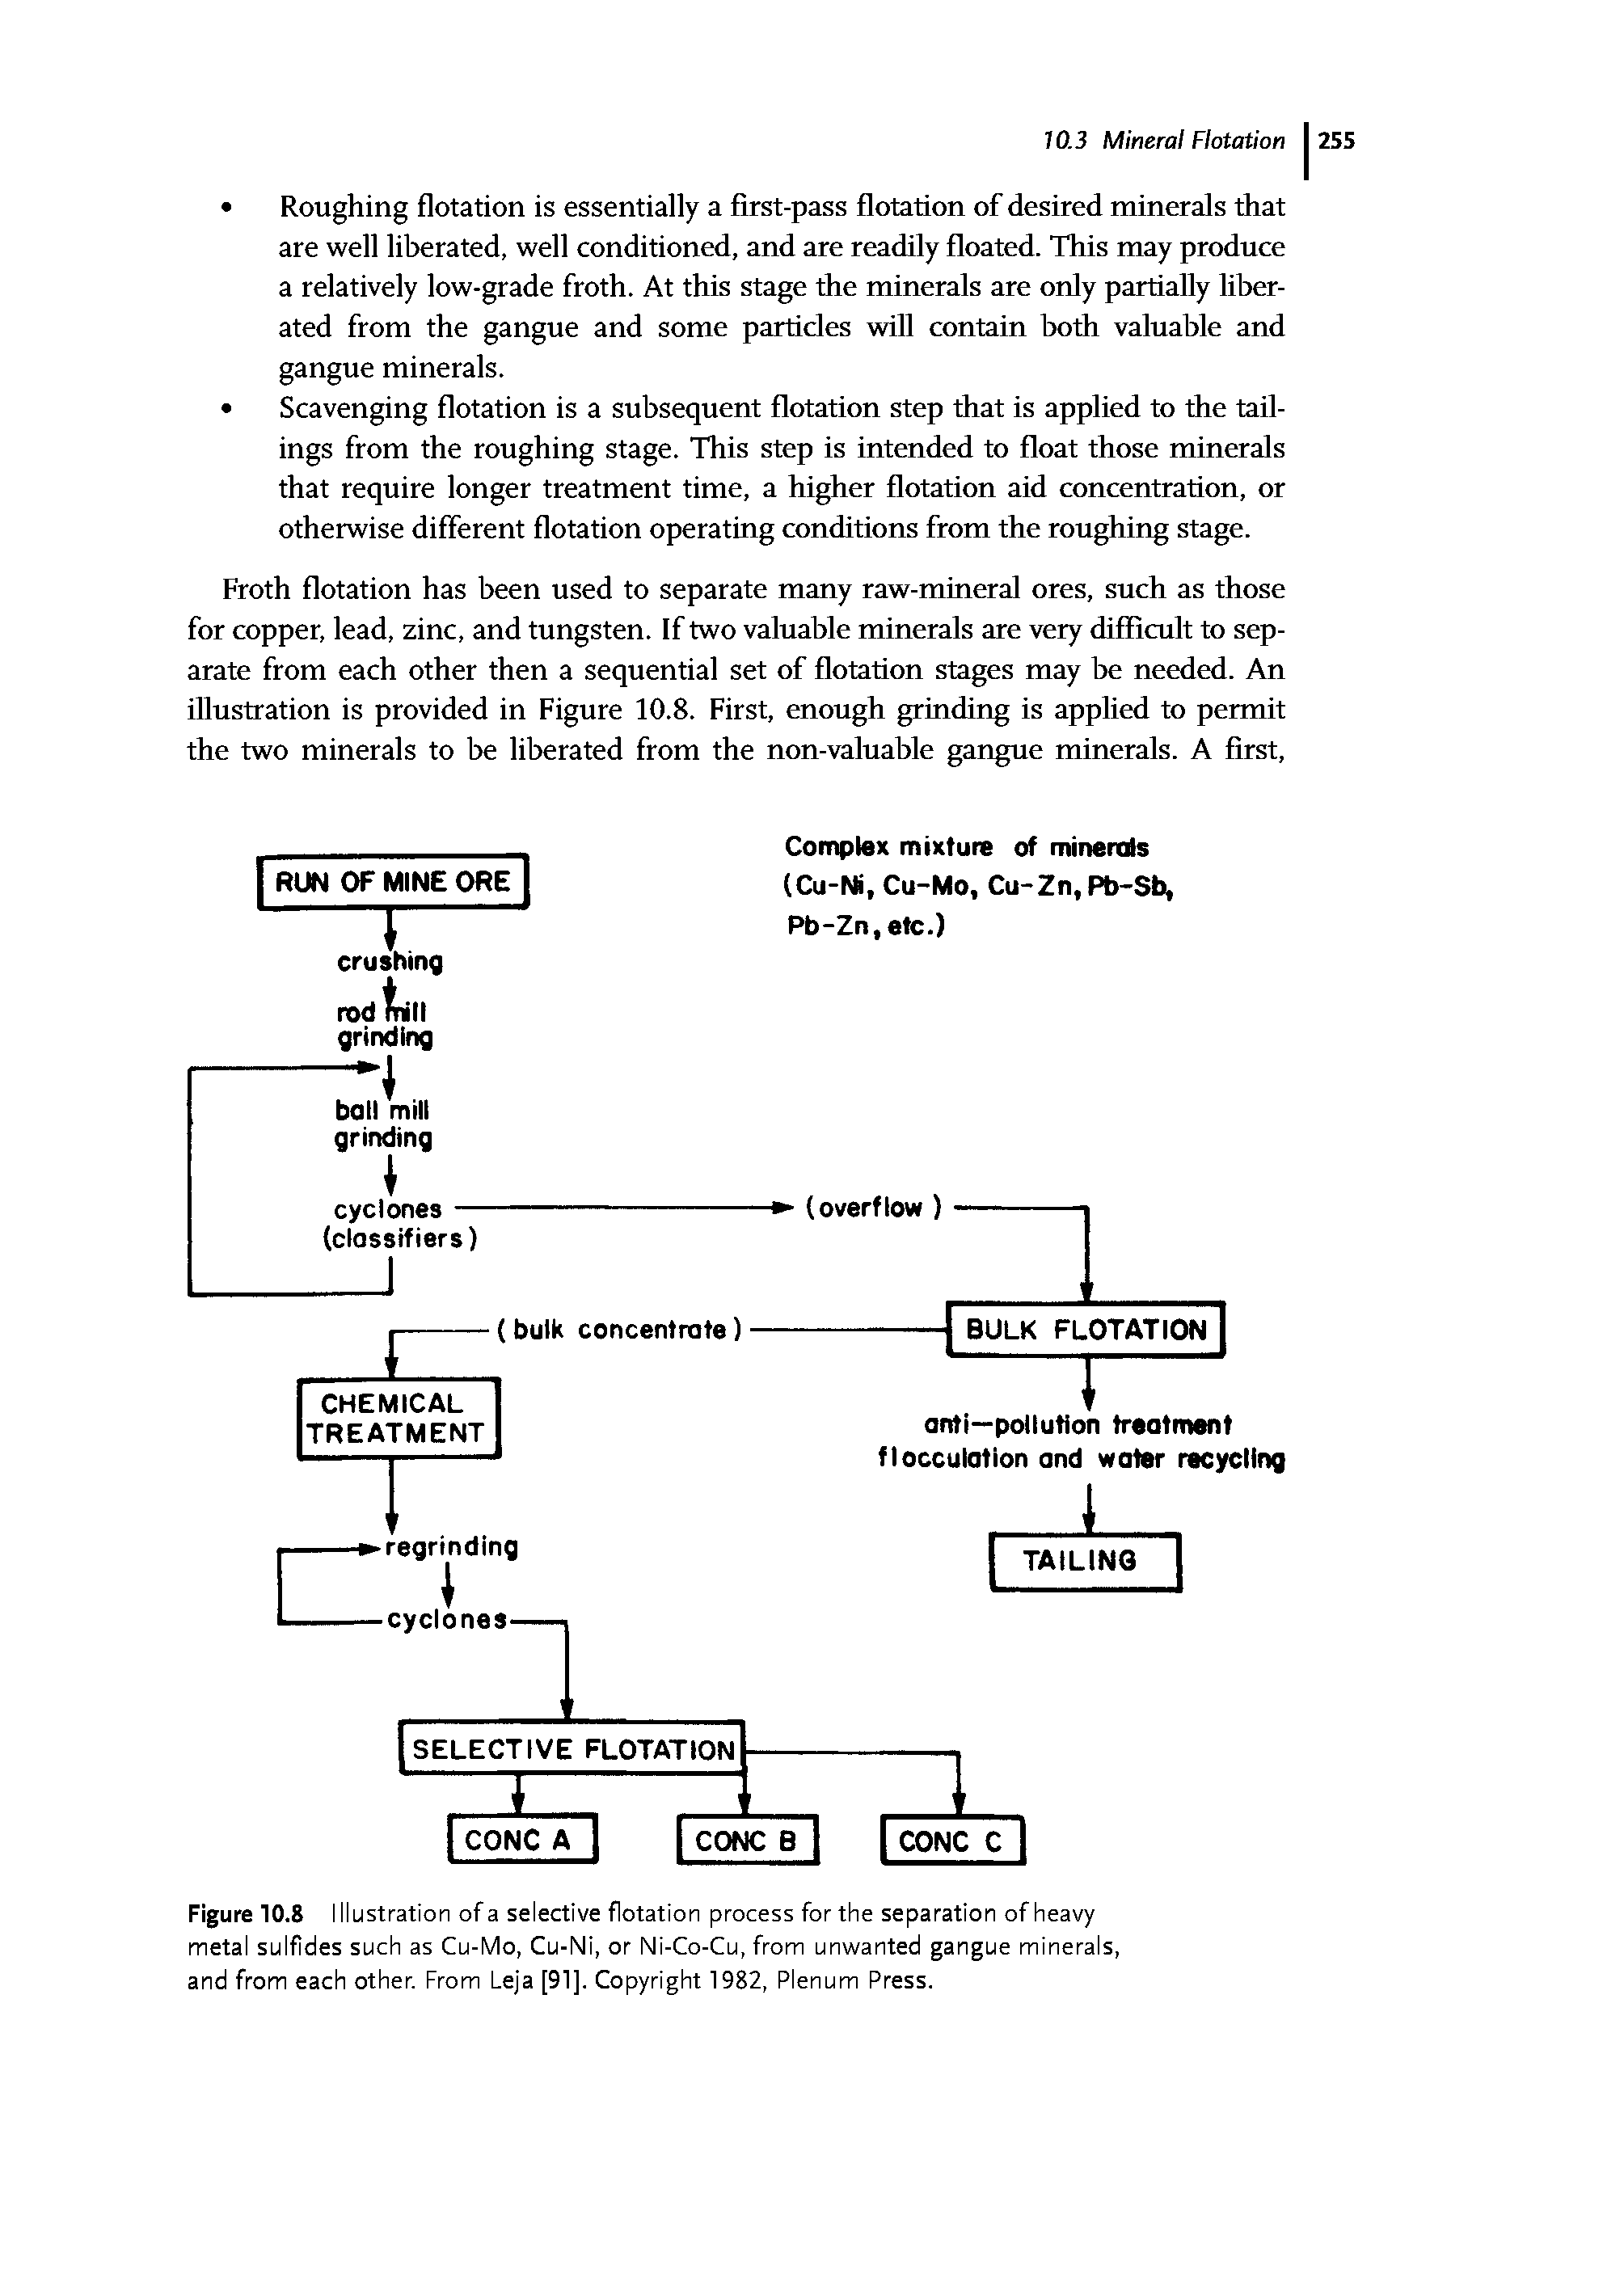 Figure 10.8 Illustration of a selective flotation process for the separation of heavy metal sulfides such as Cu-Mo, Cu-Ni, or Ni-Co-Cu, from unwanted gangue minerals, and from each other. From Leja [91]. Copyright 1982, Plenum Press.